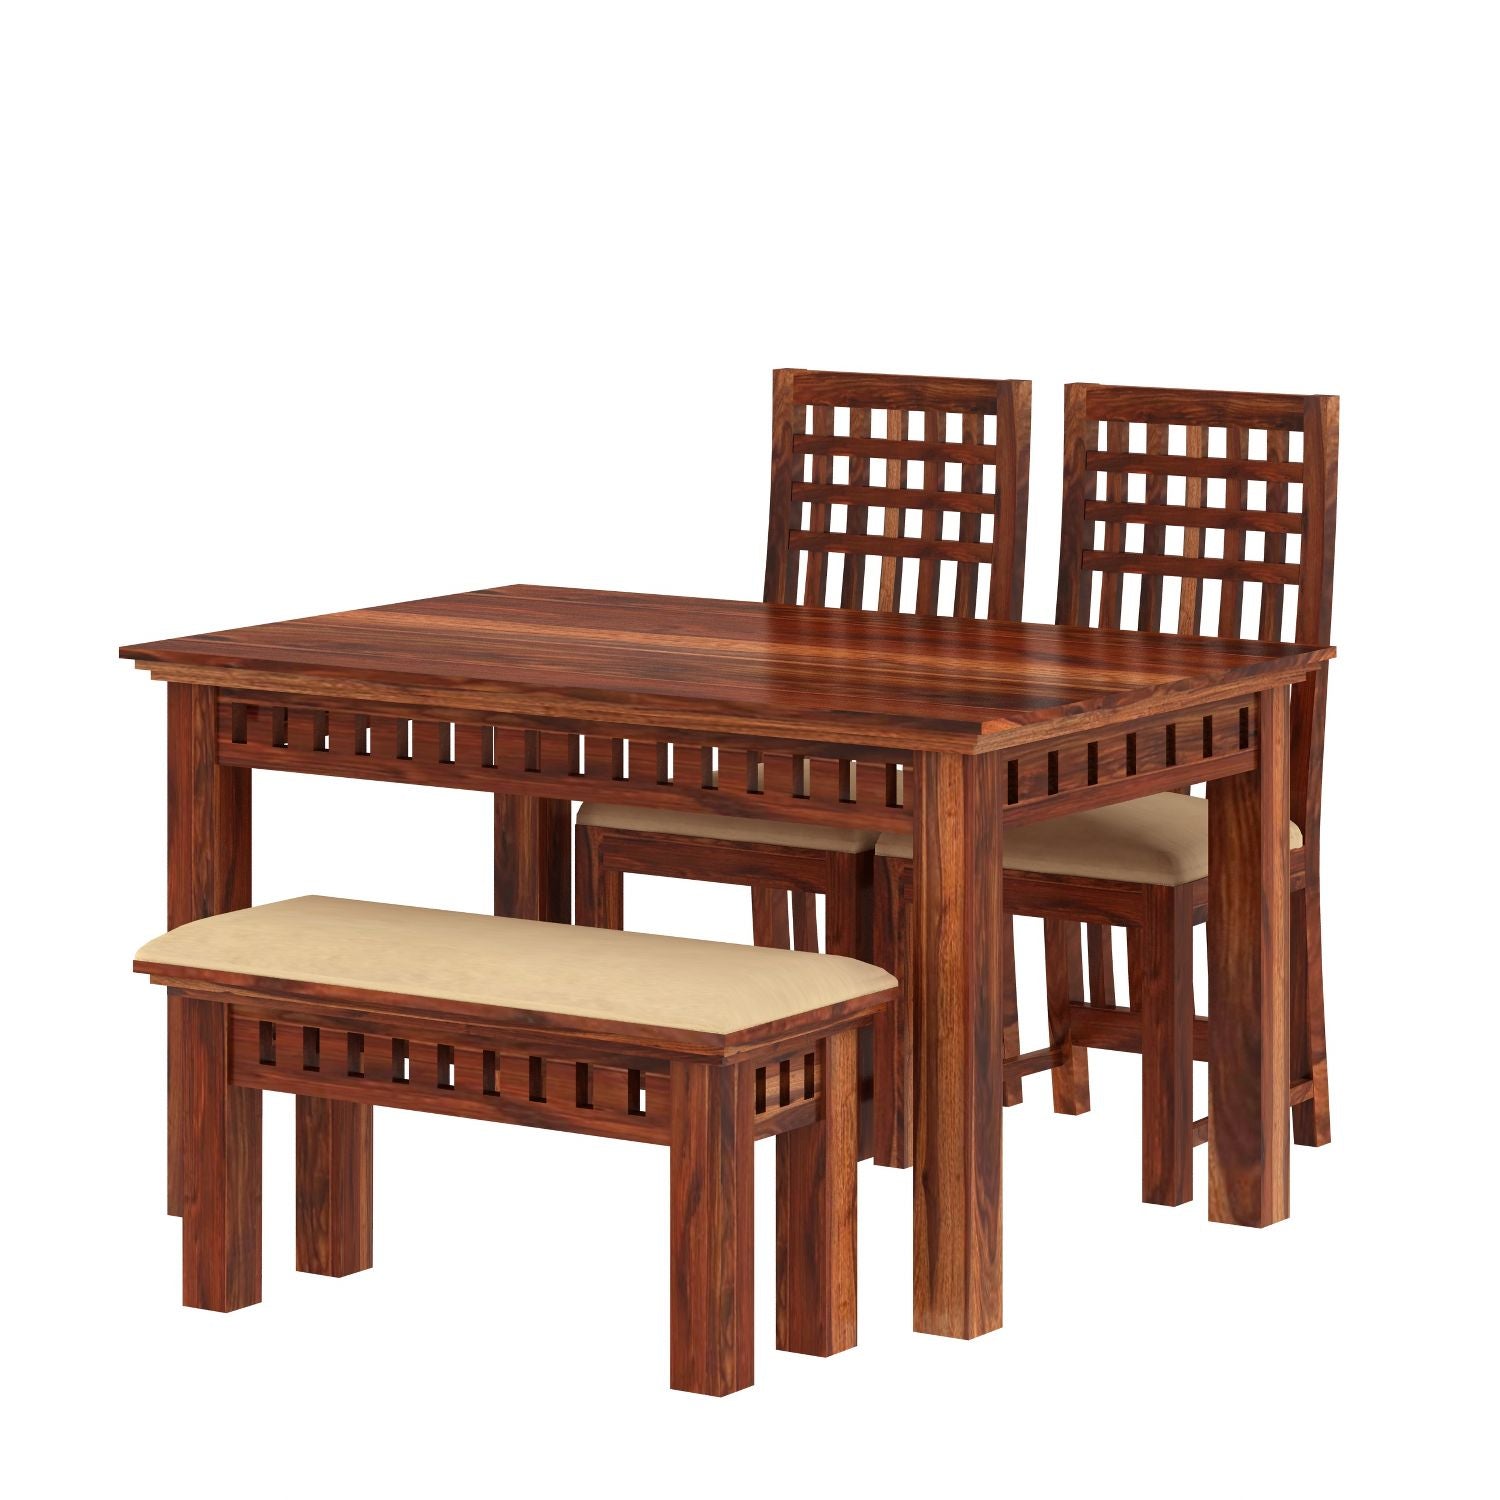 Amer Solid Sheesham Wood 4 Seater Dining Set With Bench (With Cushion, Natural Finish)